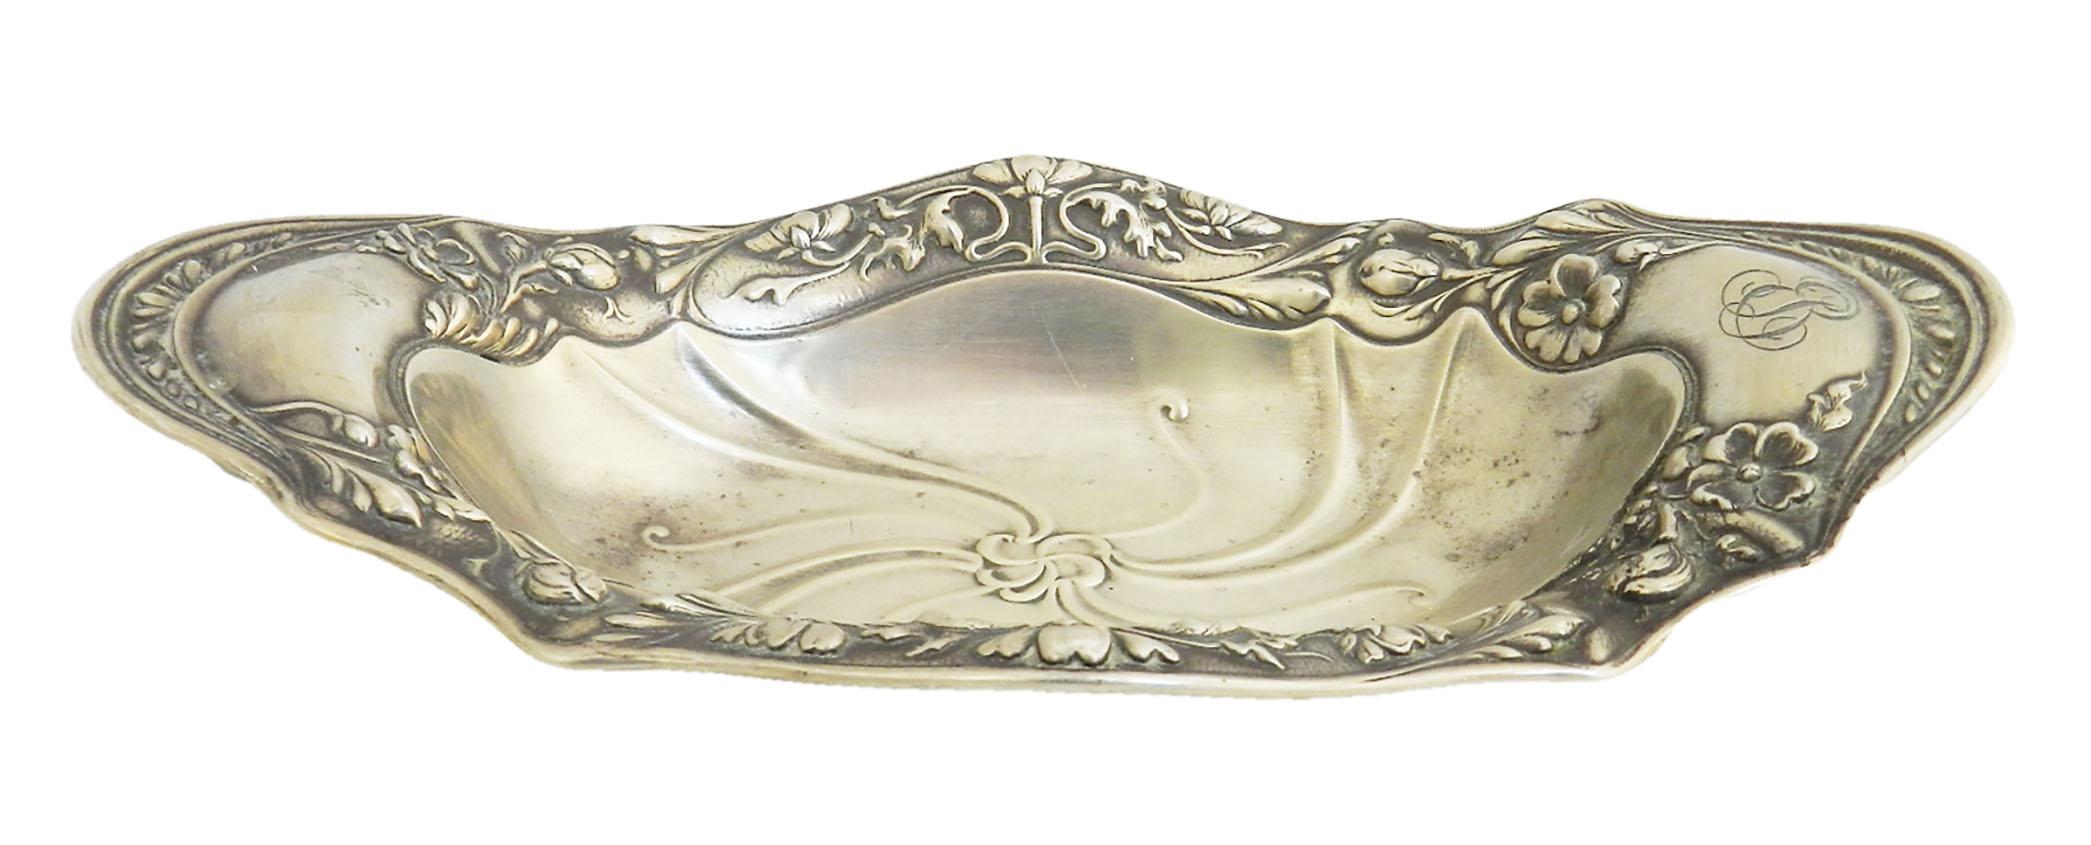 Gorham silver Art Nouveau dish
USA sterling silver
Hallmarked
Pin dish
Nut or Bonbon tray
Good antique condition 
Height = 4.5 cm (1.8